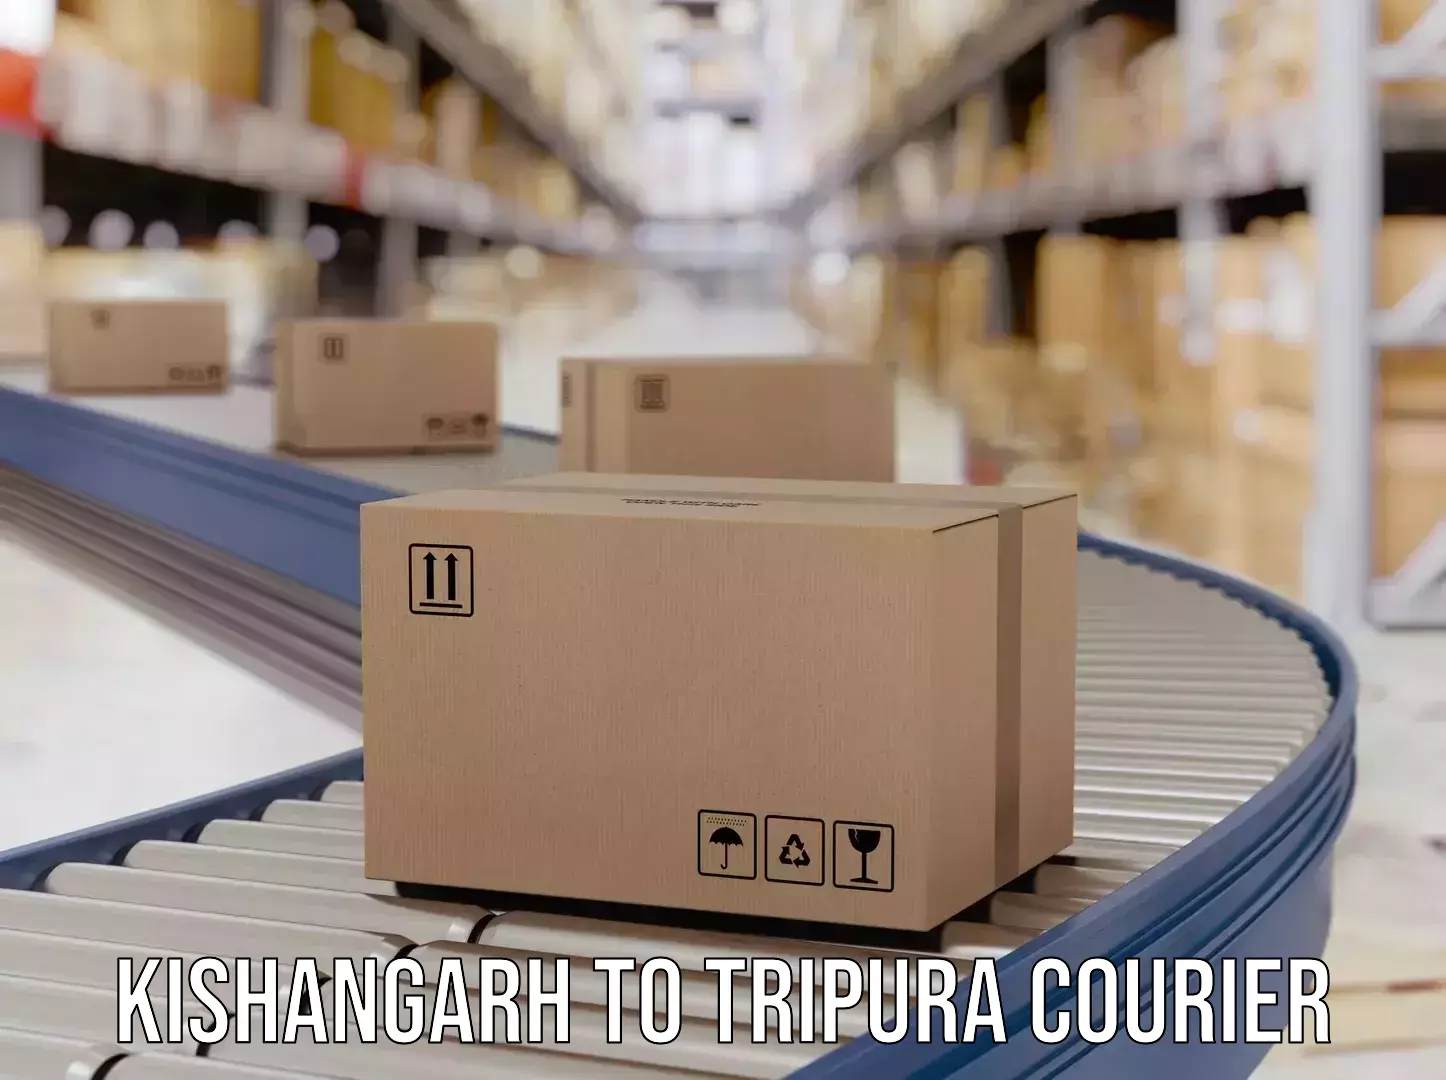 State-of-the-art courier technology Kishangarh to Kailashahar